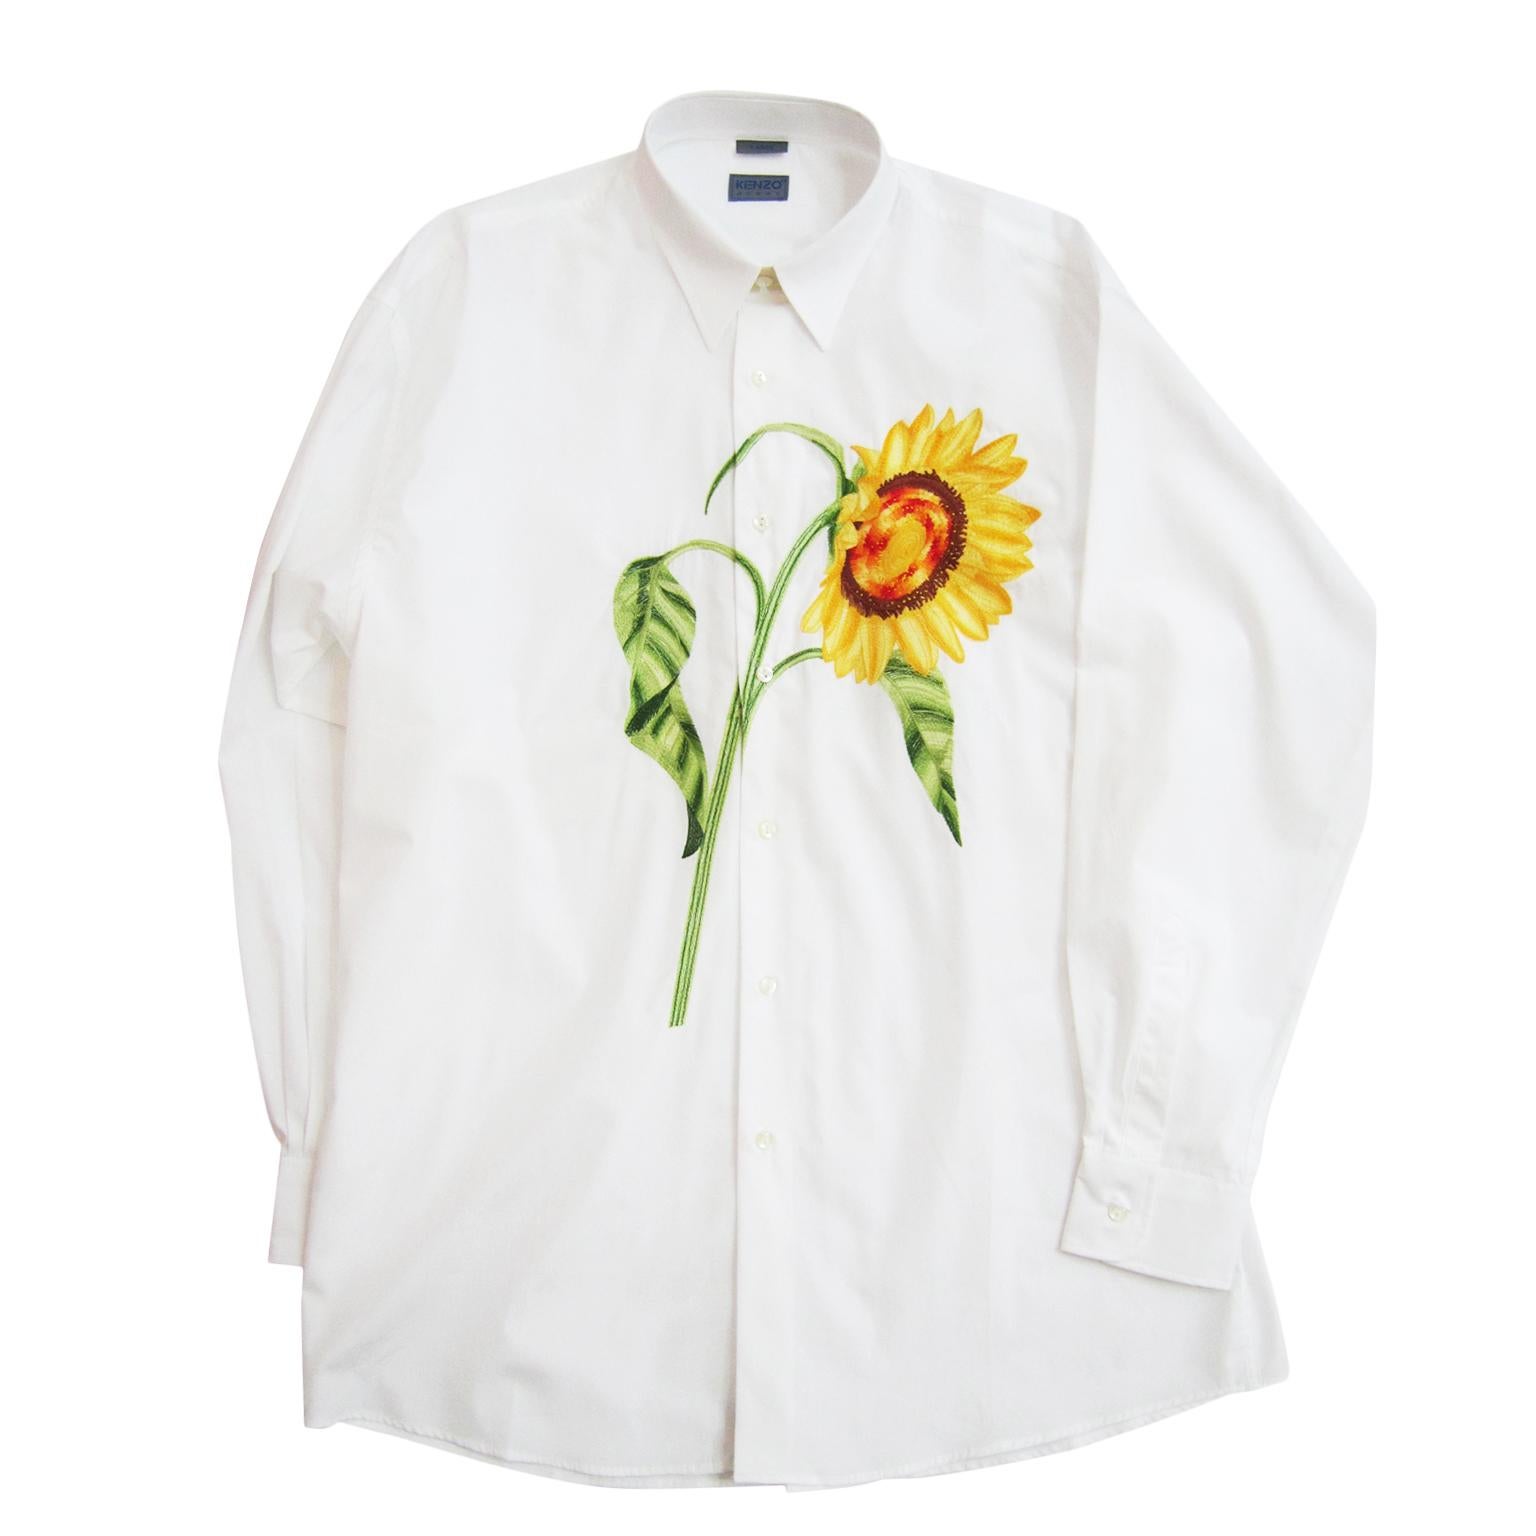 Gray Kenzo Sunflower Large Embroidery Mens White Shirt NWT 1980s For Sale